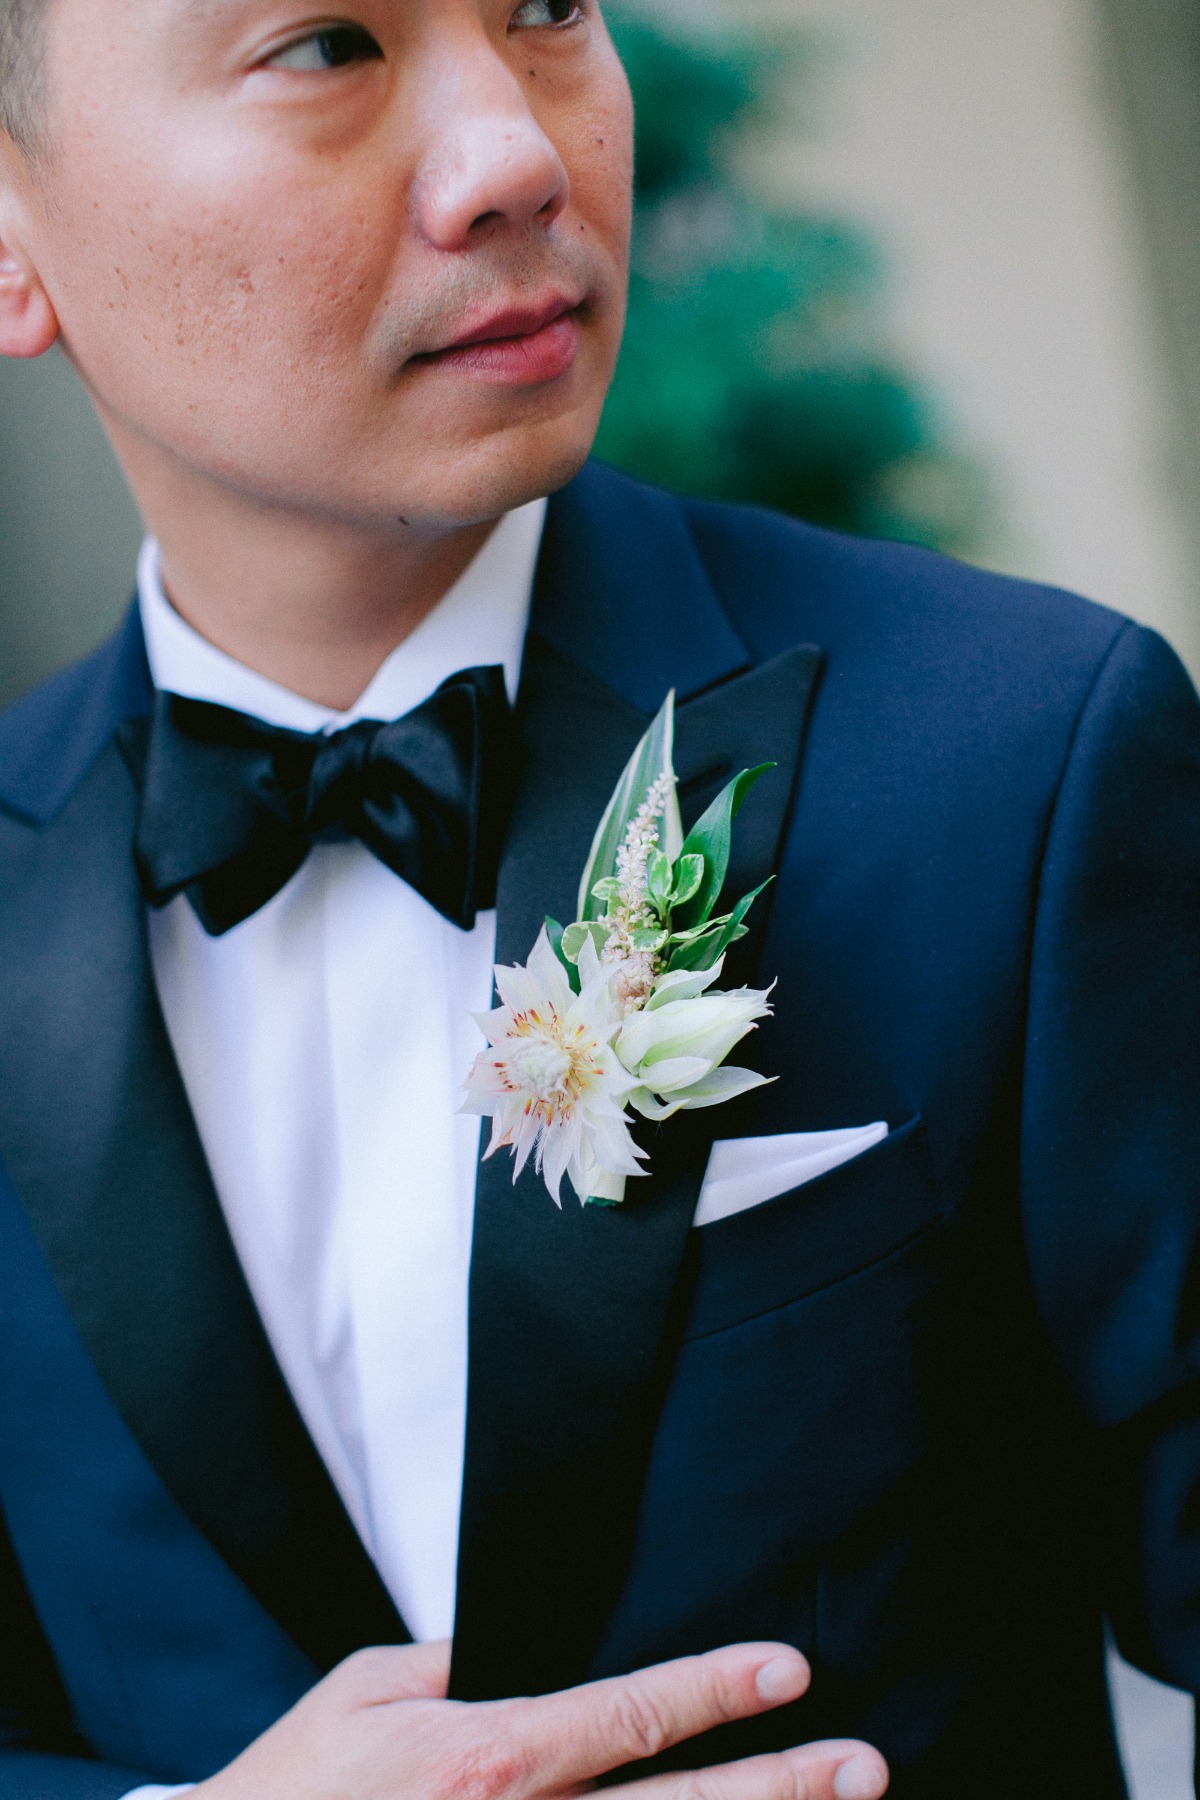 tropical boutonniÃ¨re for groom